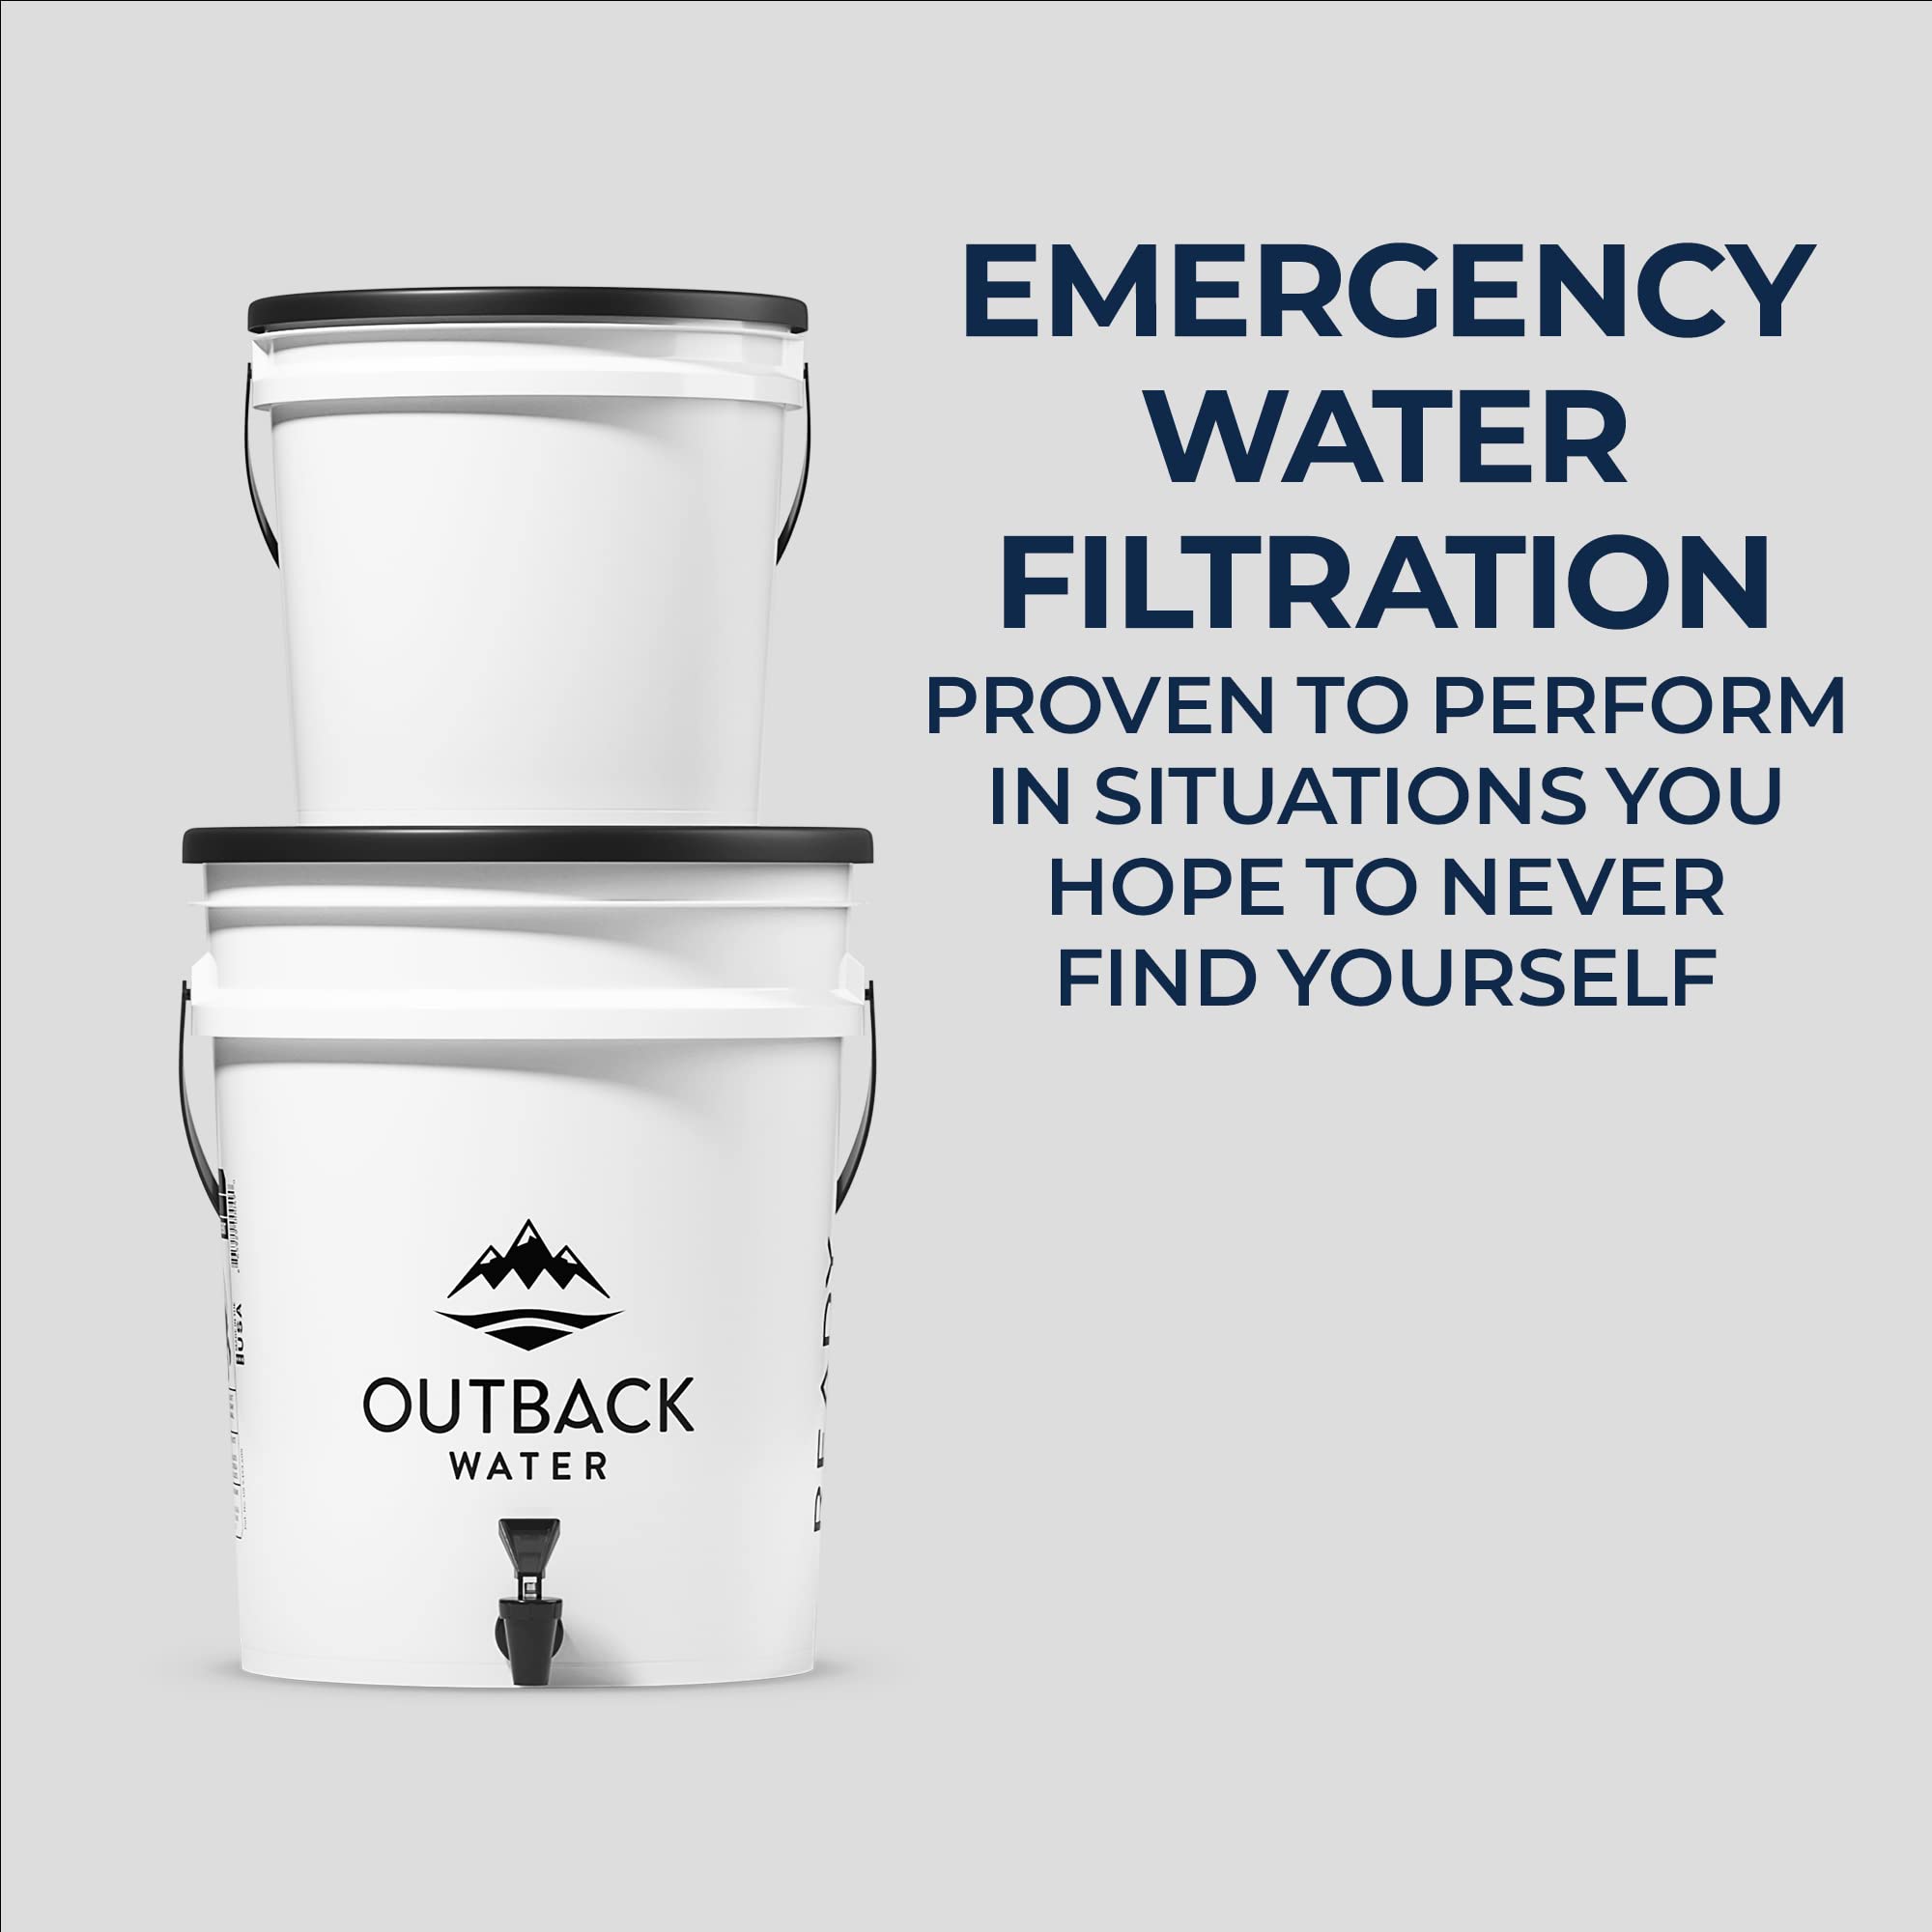 Outback Water Emergency Filtration System - 5 Gallon Bucket Water Filter - Gravity Powered, Portable, Purify up to 24 Gallons of Potable Drinking Water Per Day